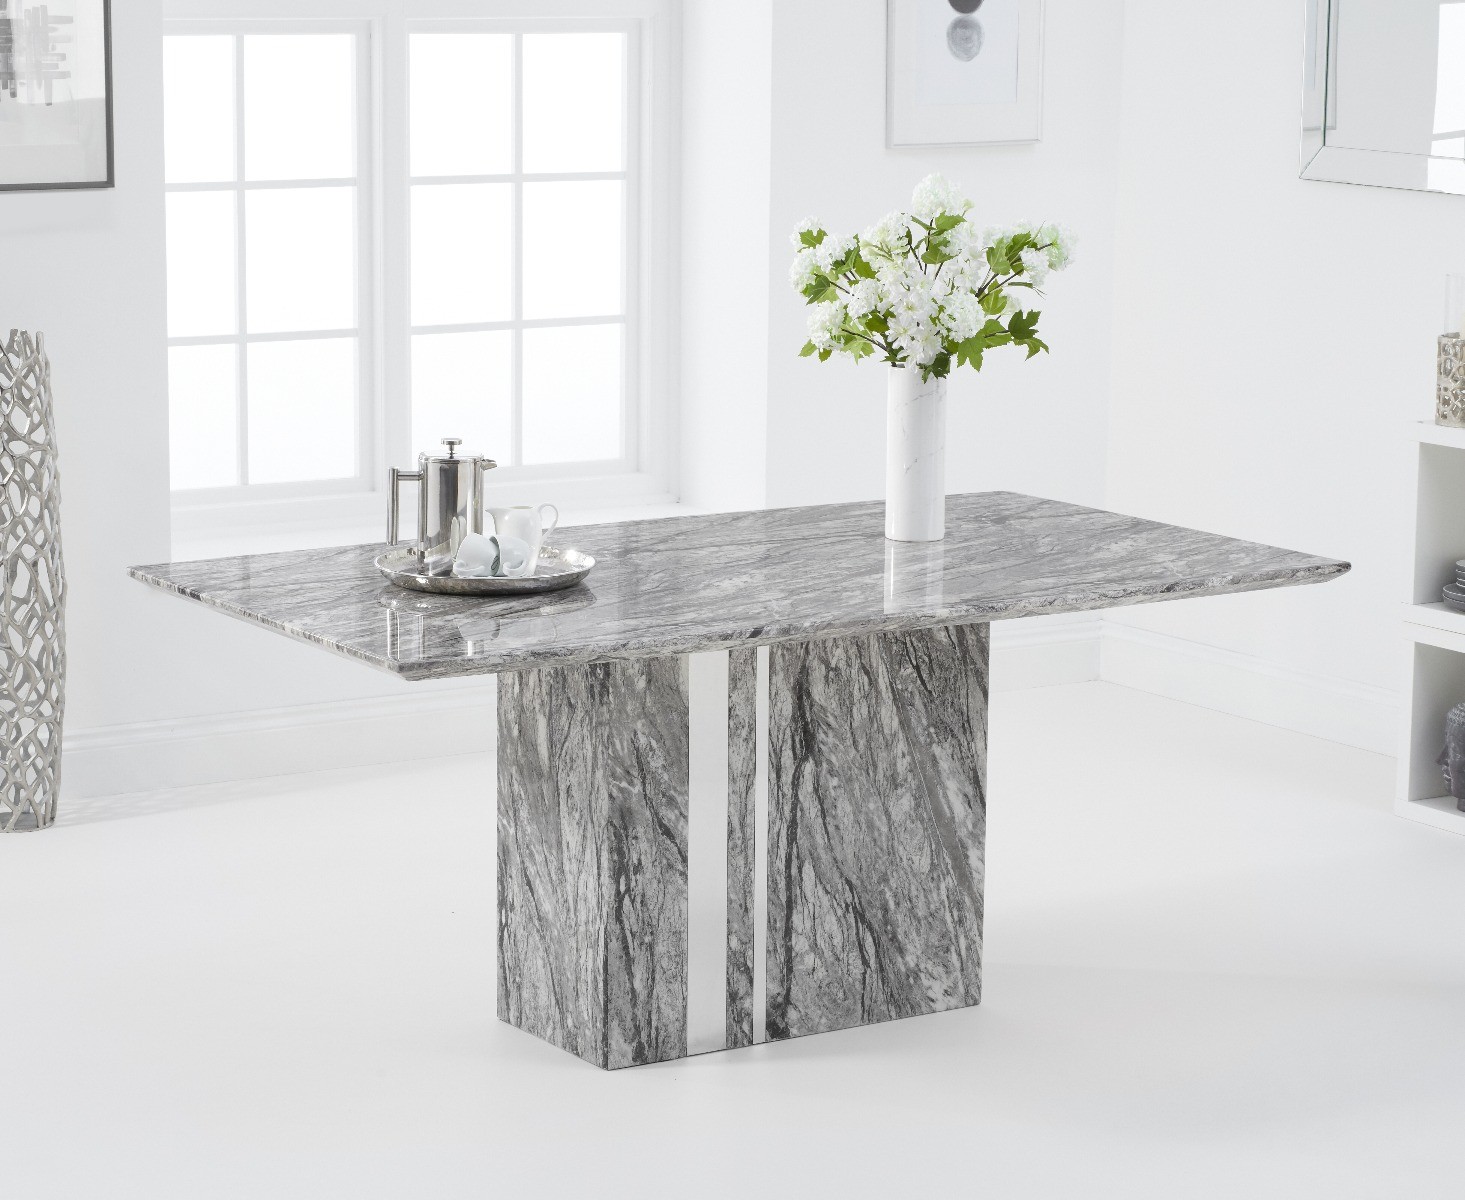 Photo 2 of Alicia 180cm grey marble dining table with 8 black aldo chairs